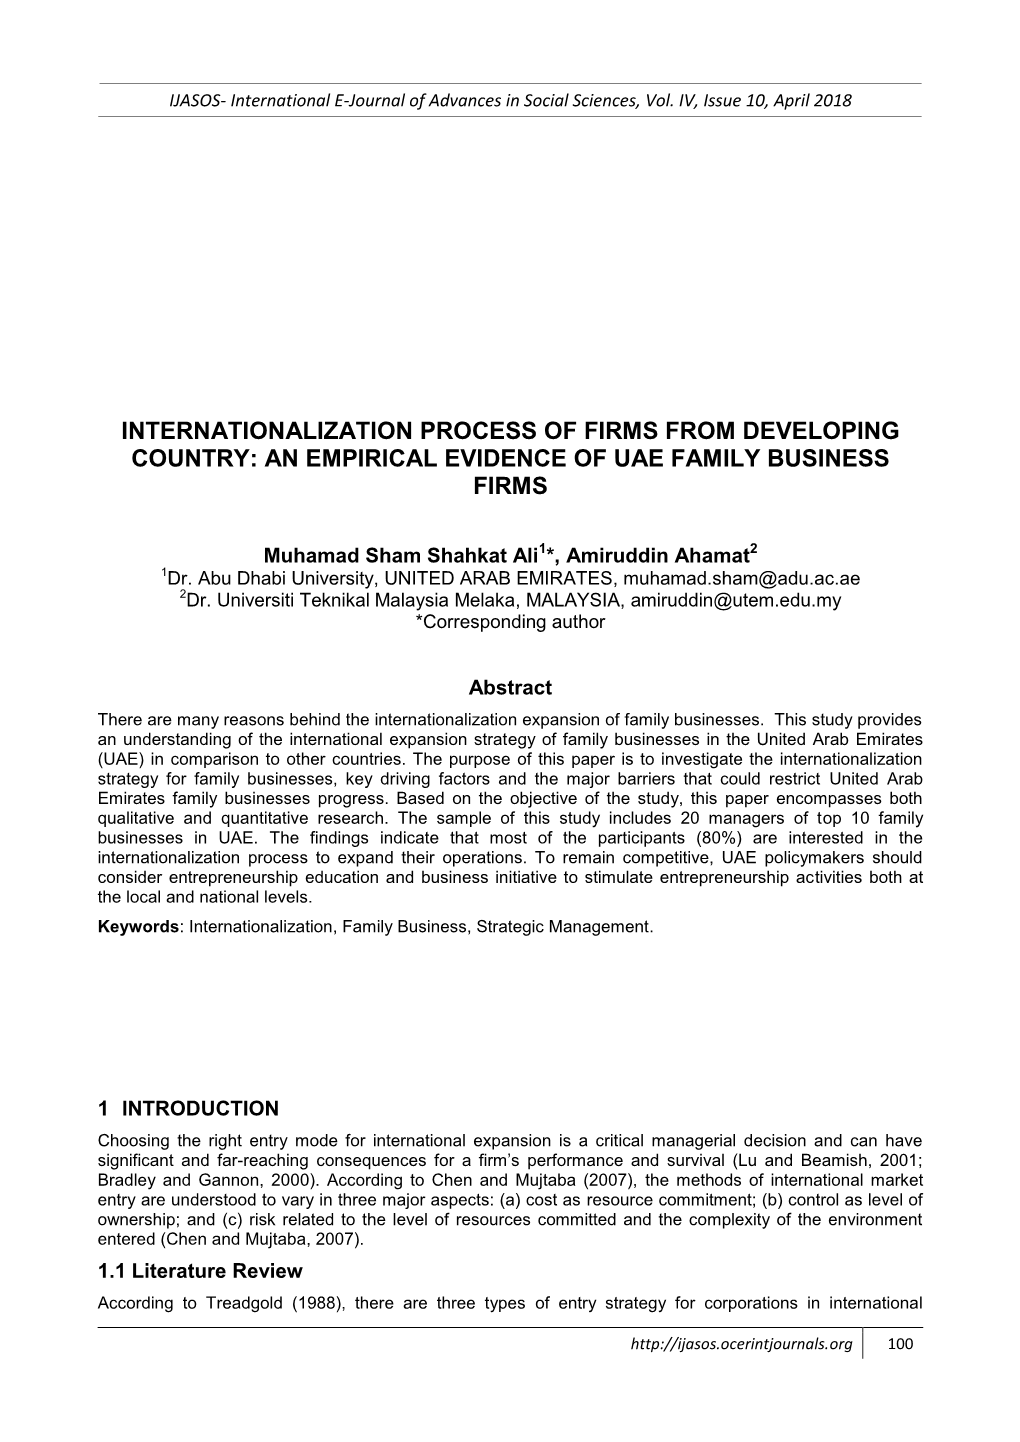 Internationalization Process of Firms from Developing Country: an Empirical Evidence of Uae Family Business Firms